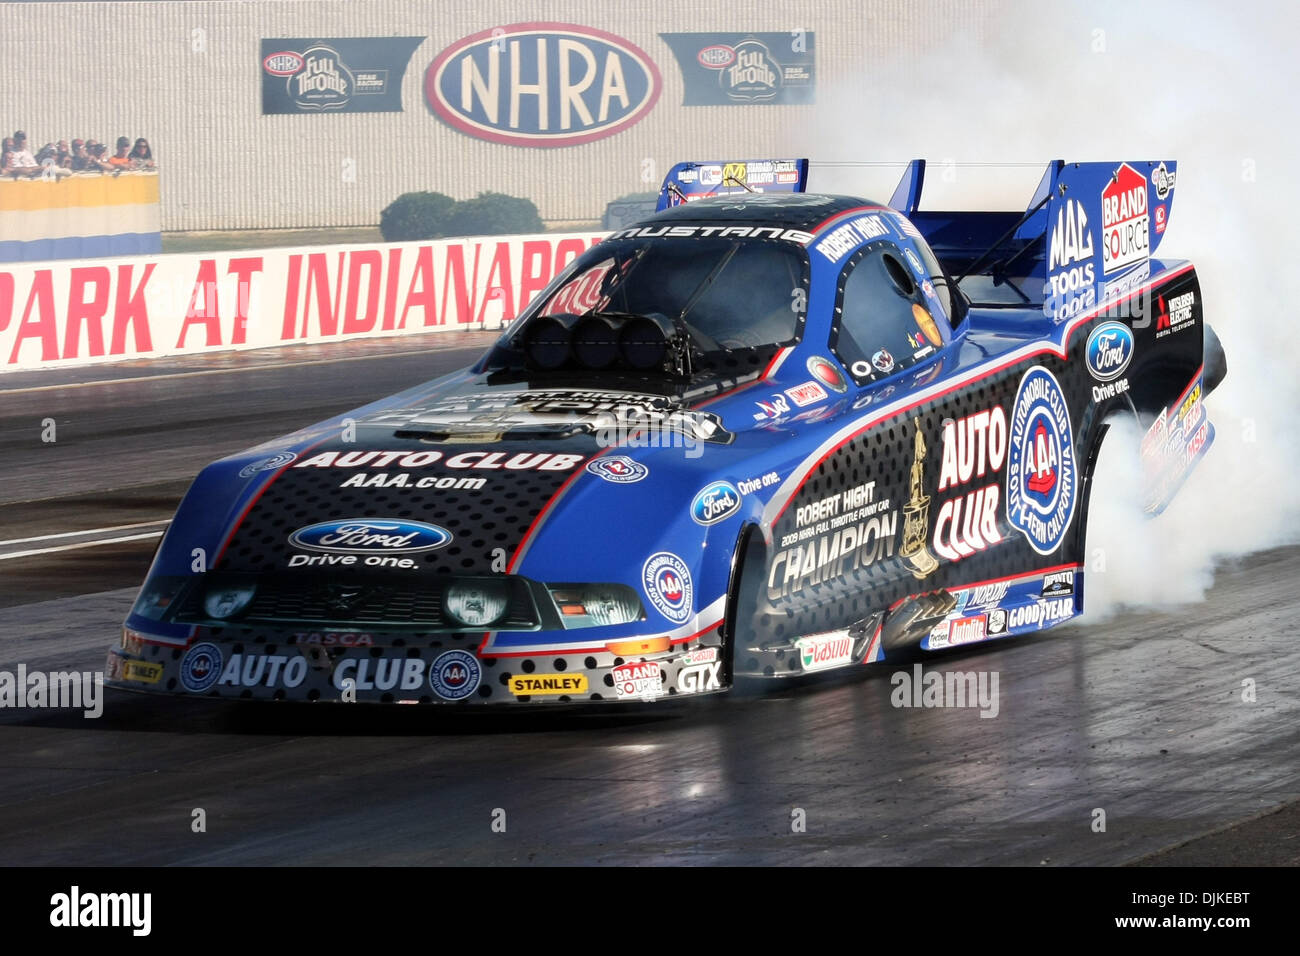 Sept. 4, 2010 - Indianapolis, Indiana, United States of America - 04 September2010: Robert Hight does a burnout in his Ford Mustang. The U.S. Nationals were held at O'Reilly Raceway Park in Indianapolis, Indiana. (Credit Image: © Alan Ashley/Southcreek Global/ZUMApress.com) Stock Photo